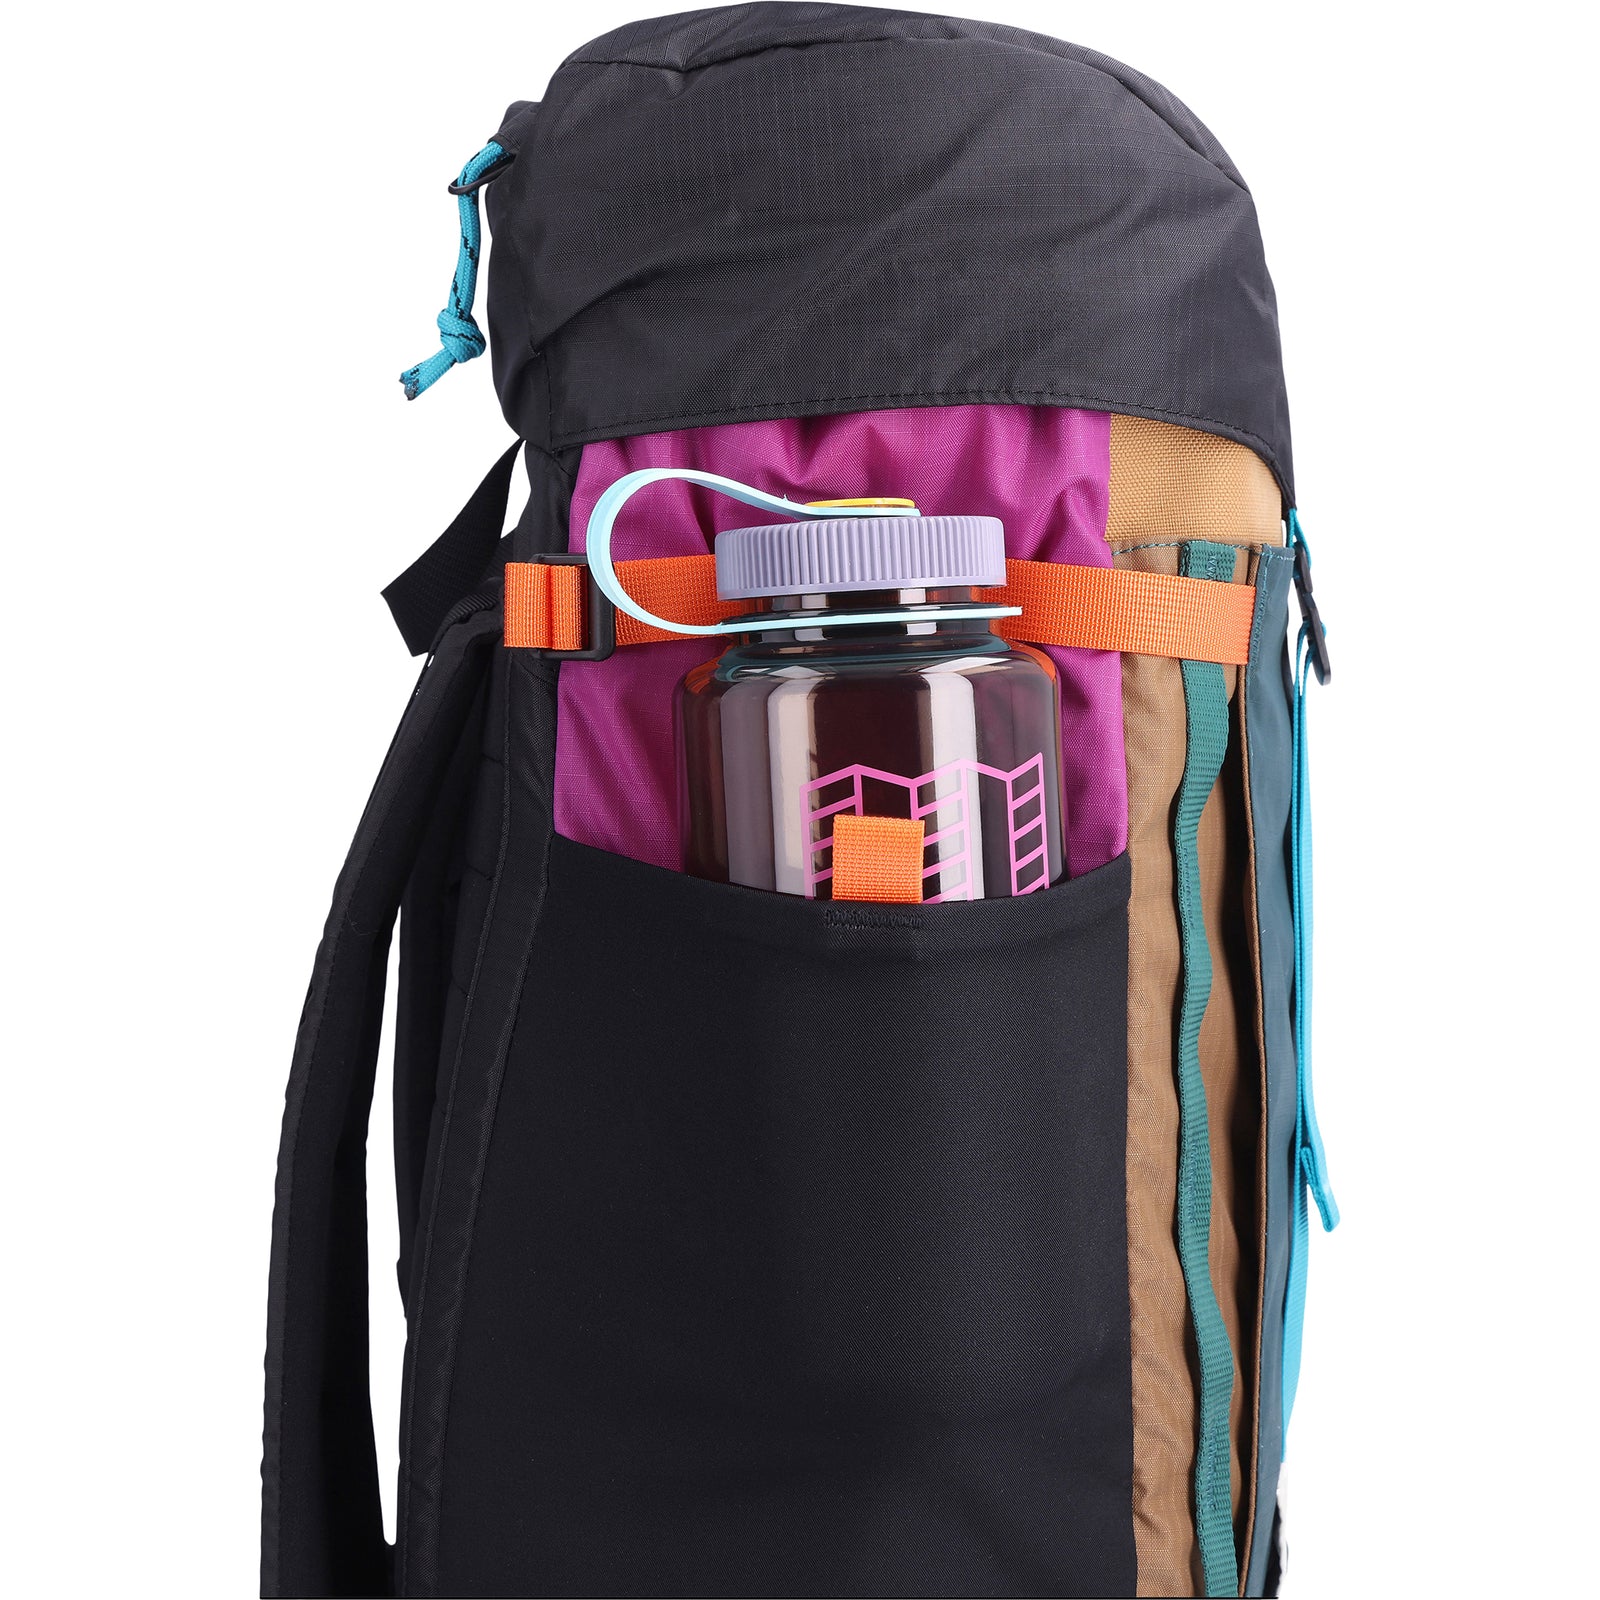 General shot of side water bottle pocket on Topo Designs Mountain Pack 16L hiking backpack with internal laptop sleeve in lightweight recycled nylon in "Burgundy / Dark Khaki".